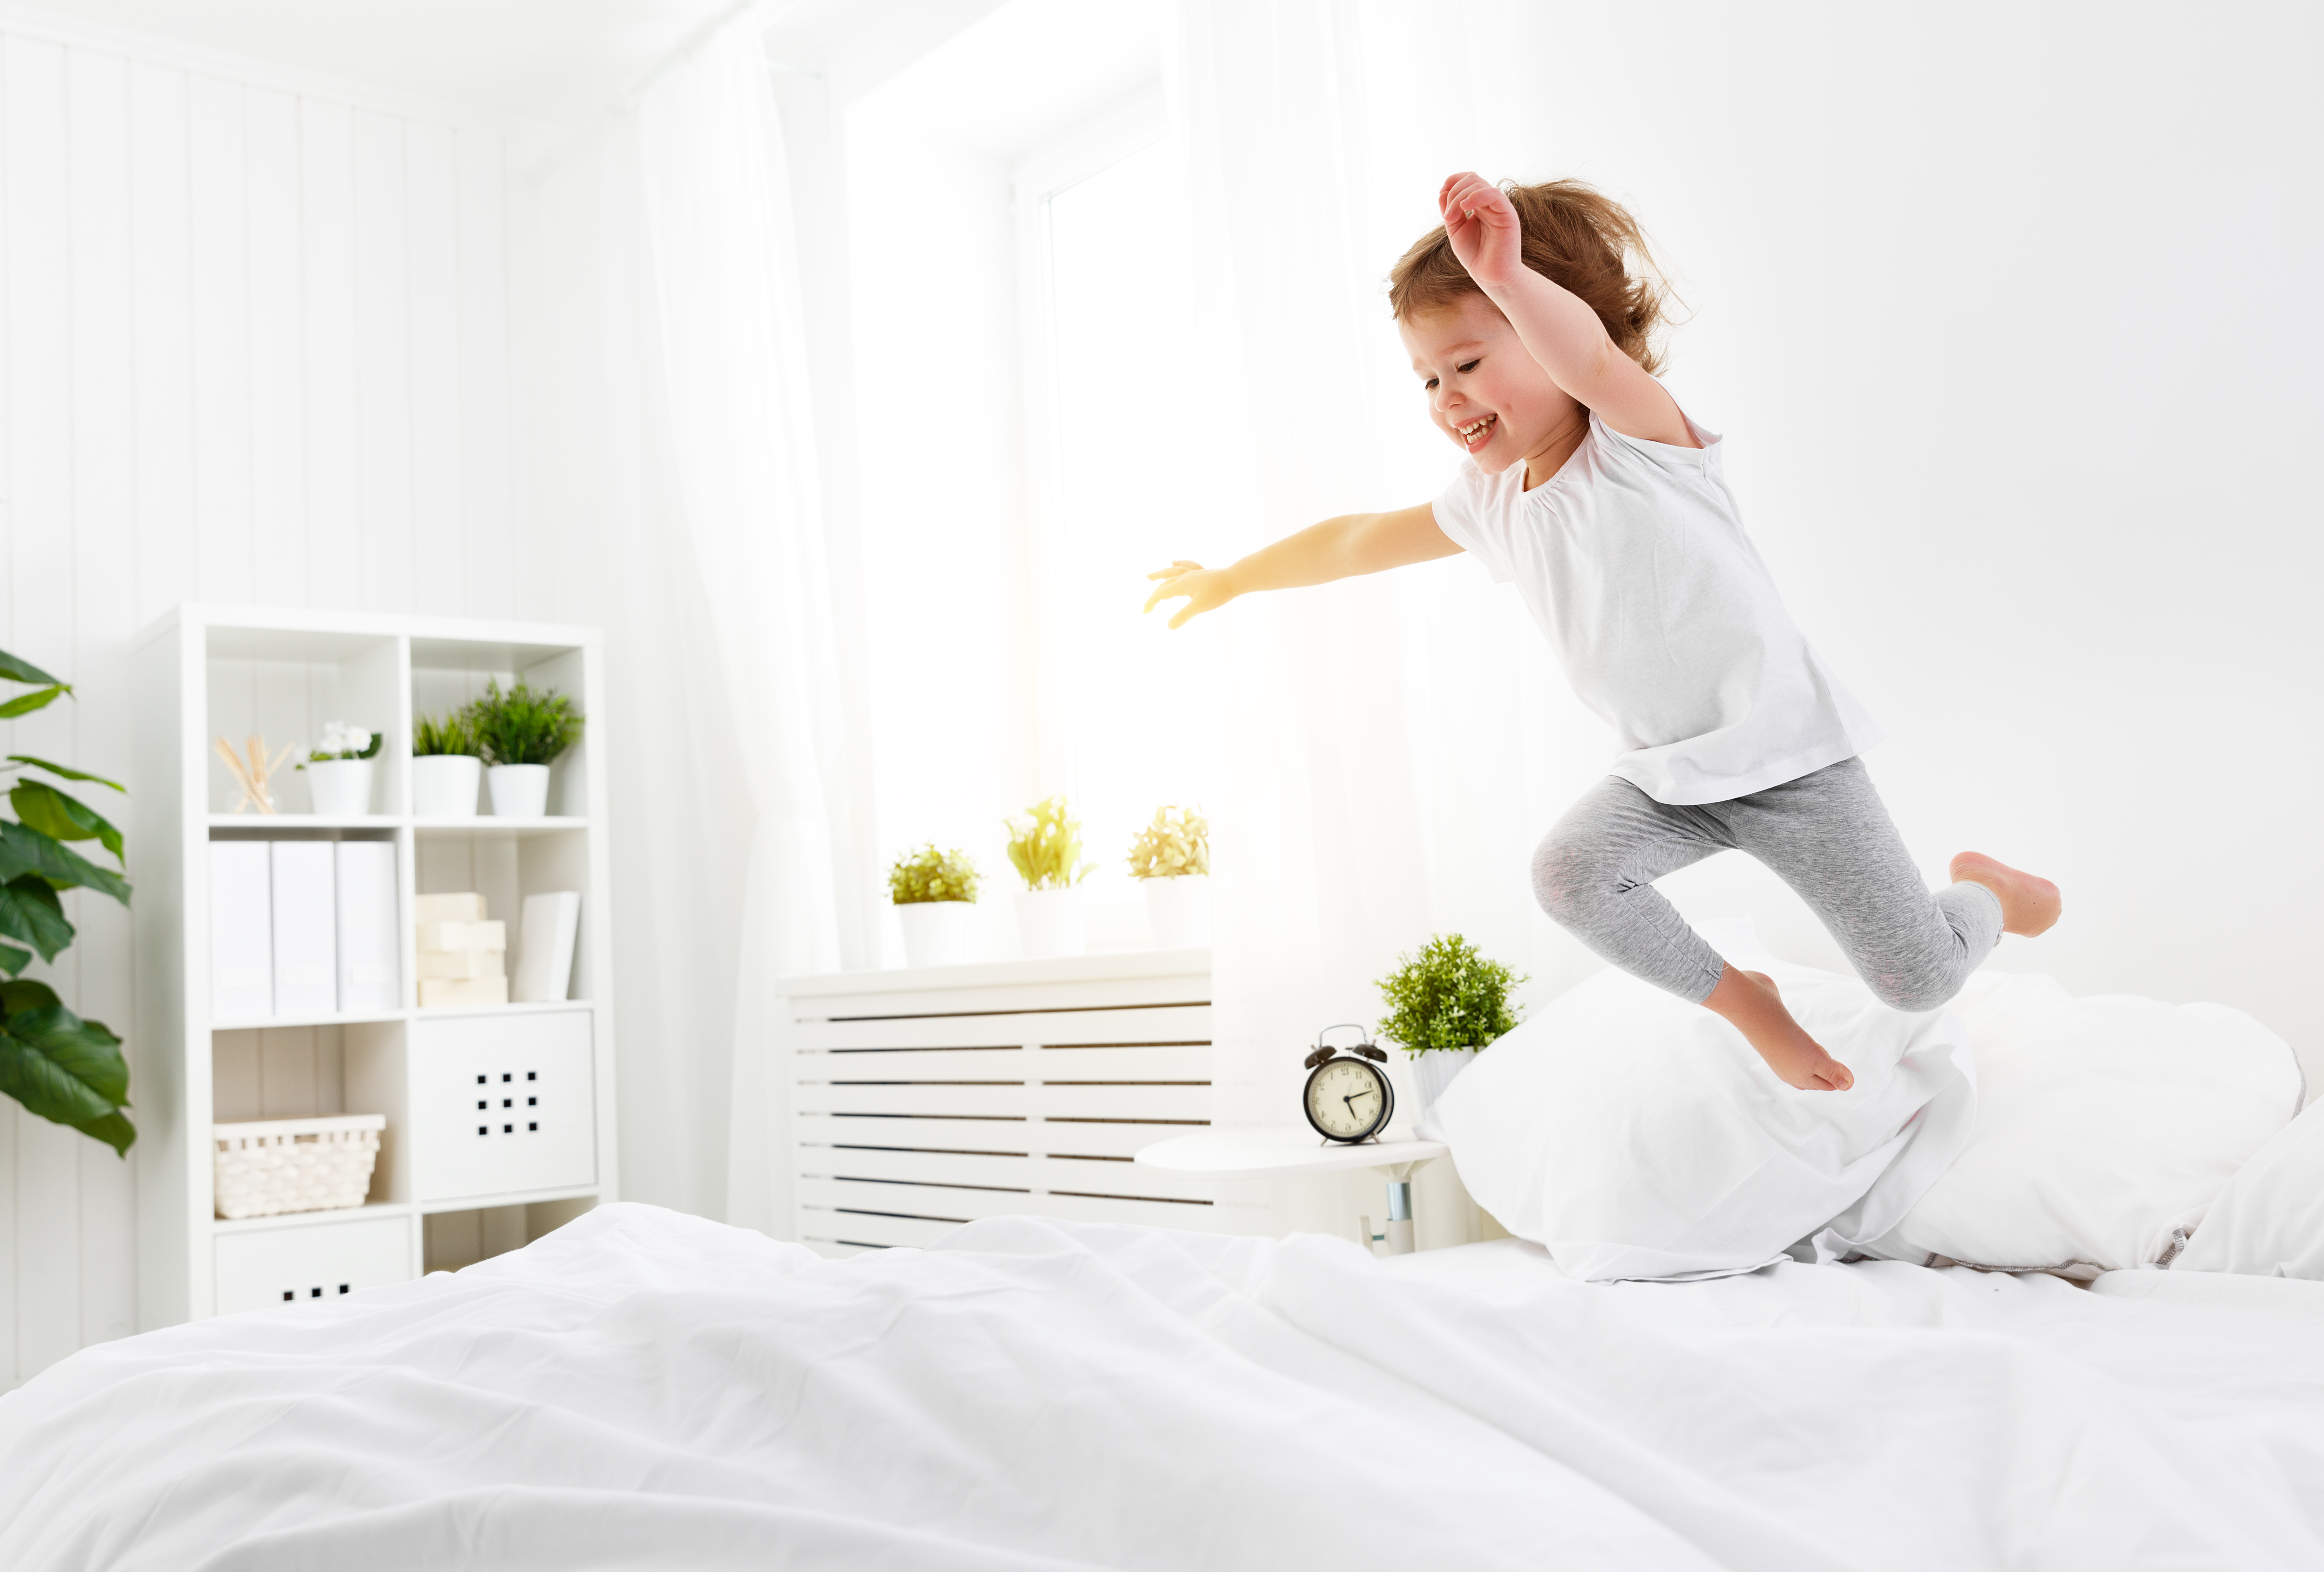 Toddler Smiling & Jumping on the Bed